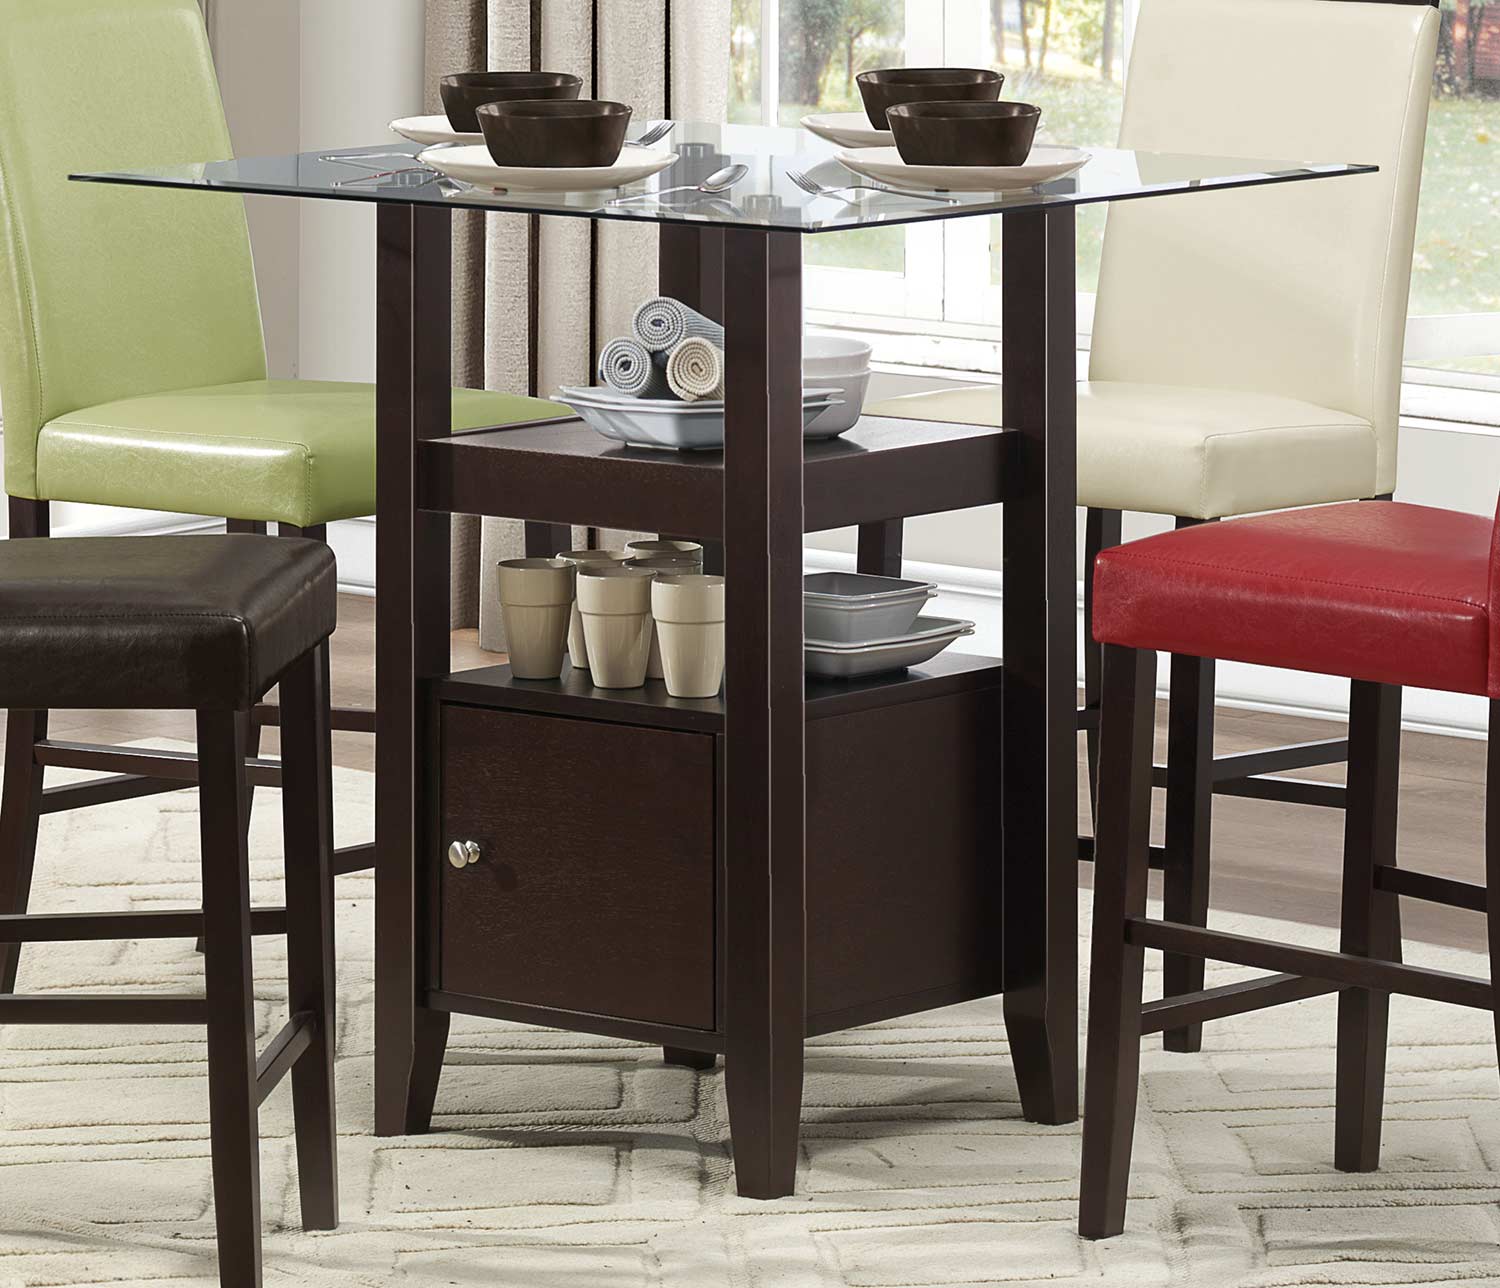 Homelegance Bari Counter Height Table with Storage Base - Dark Brown